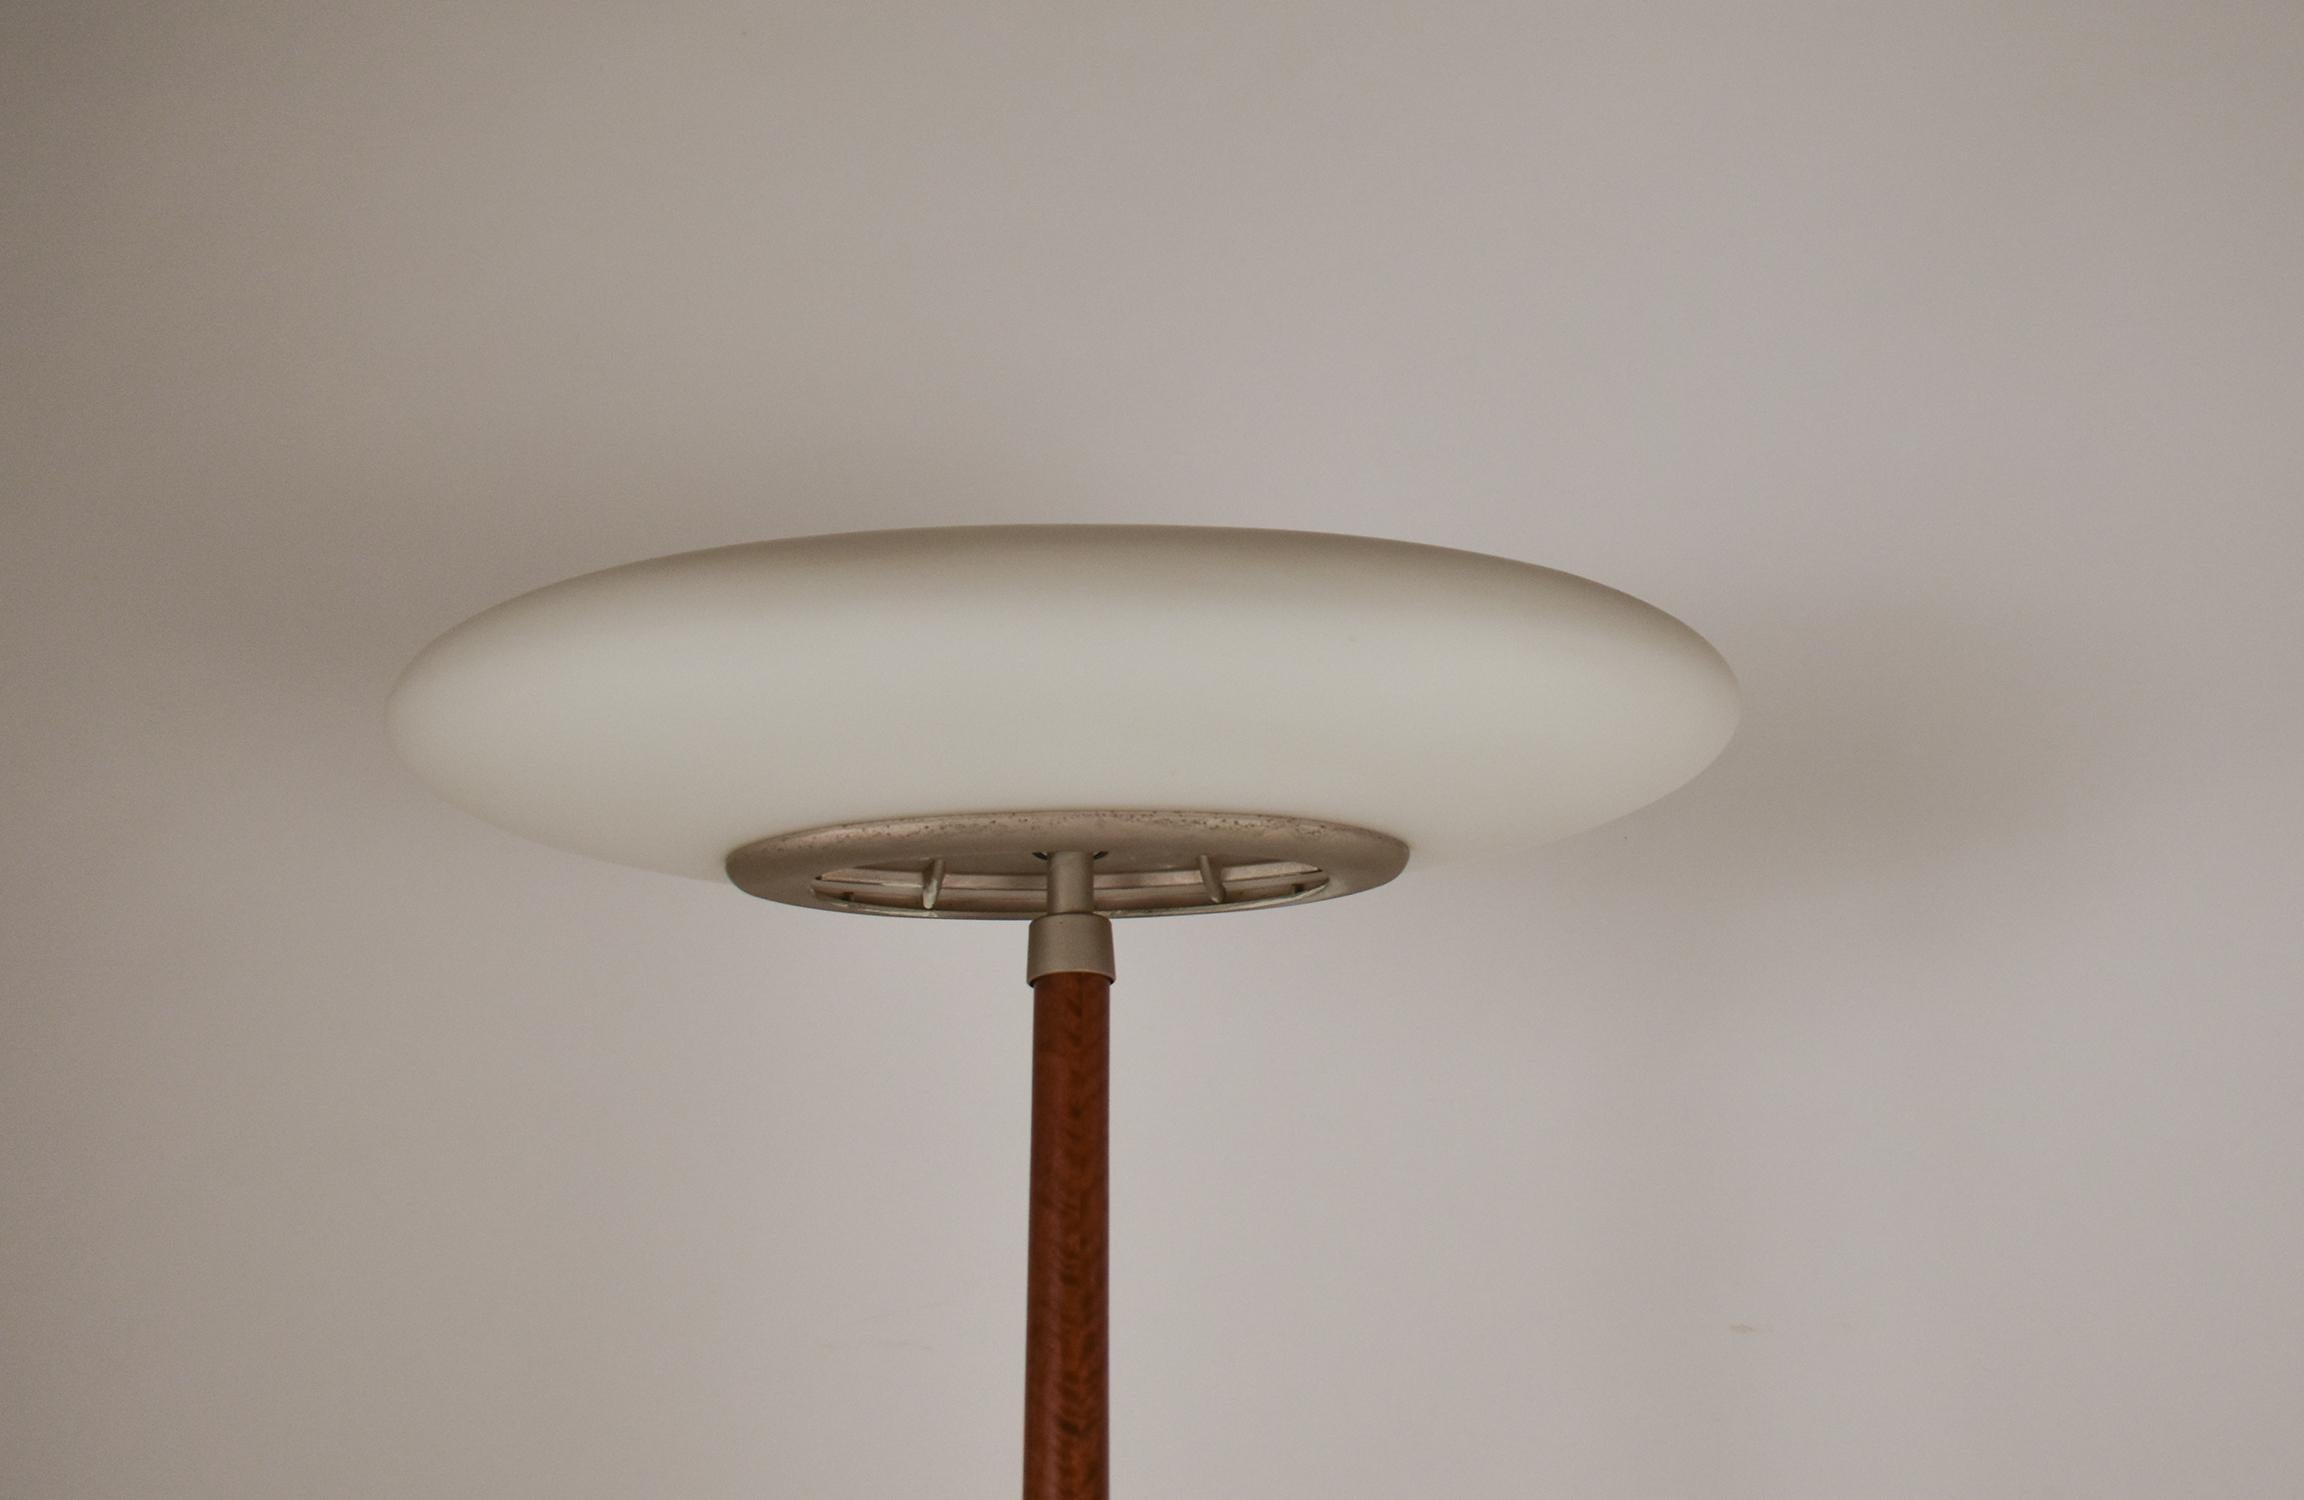 Modern PAO Floor Lamp by Matteo Thun for Arteluce, Italy 1990's For Sale